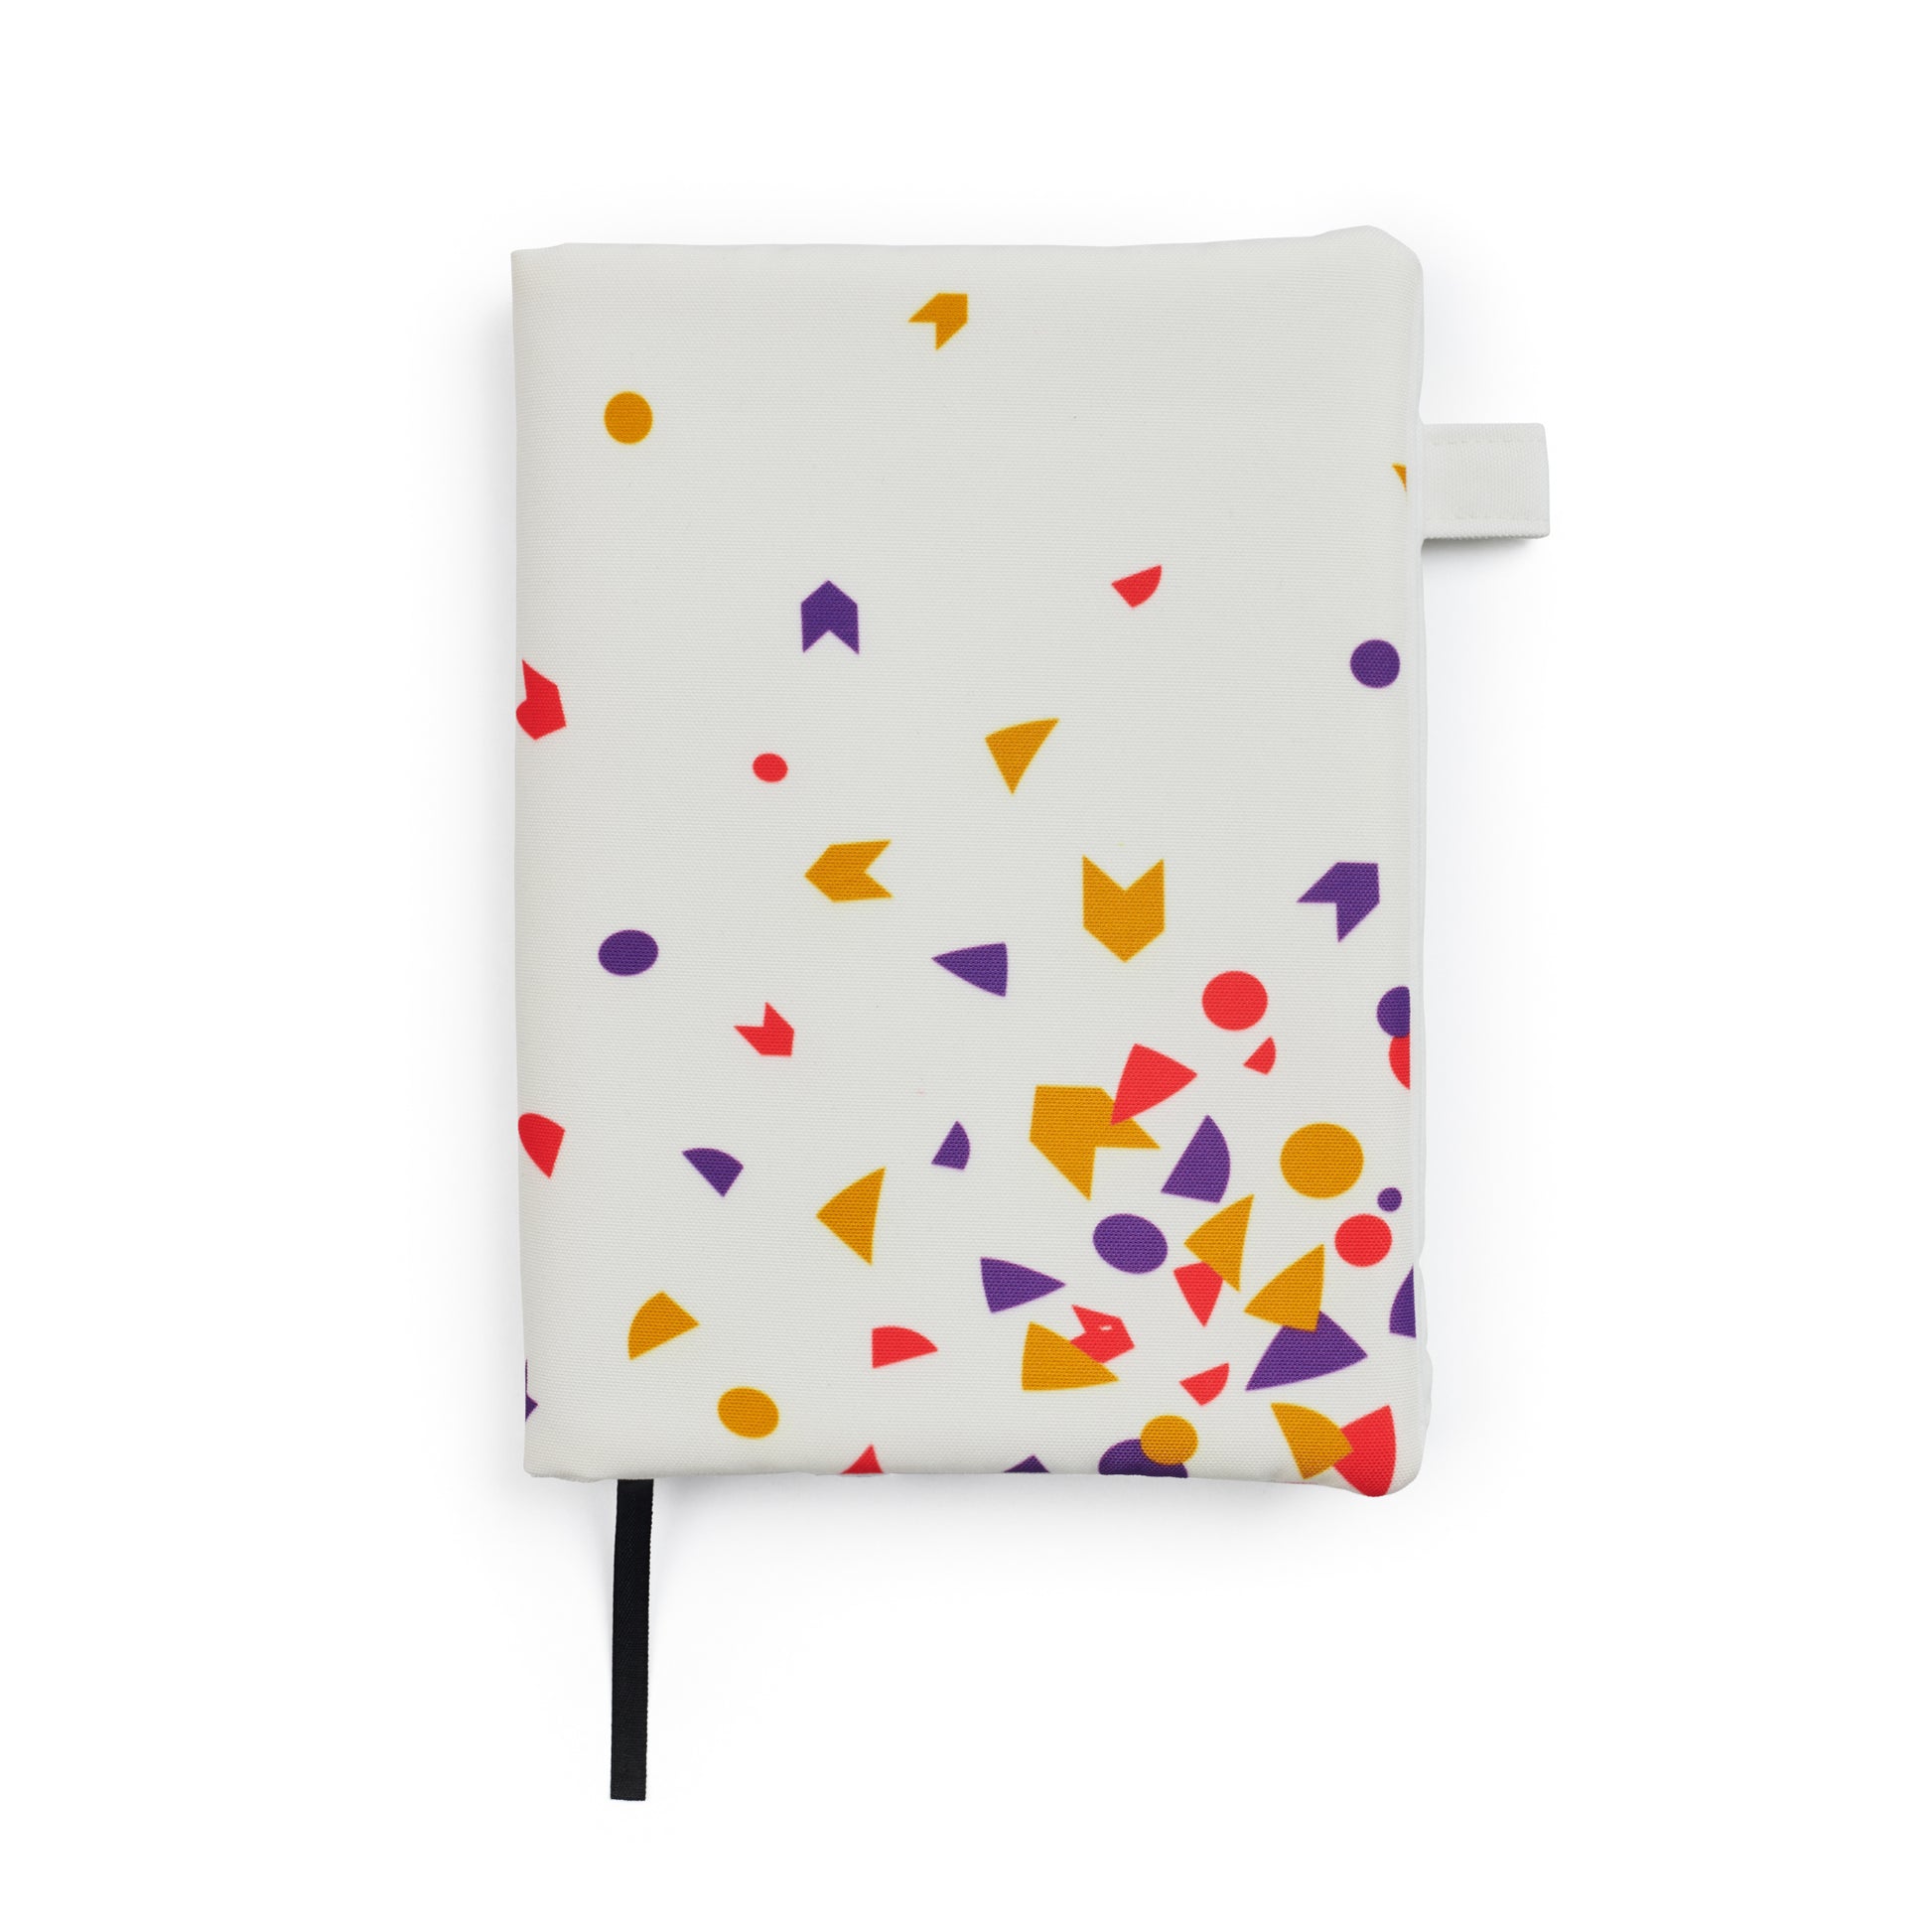 Sydney Opera House 50th anniversary celebration note book  with colourful shapes